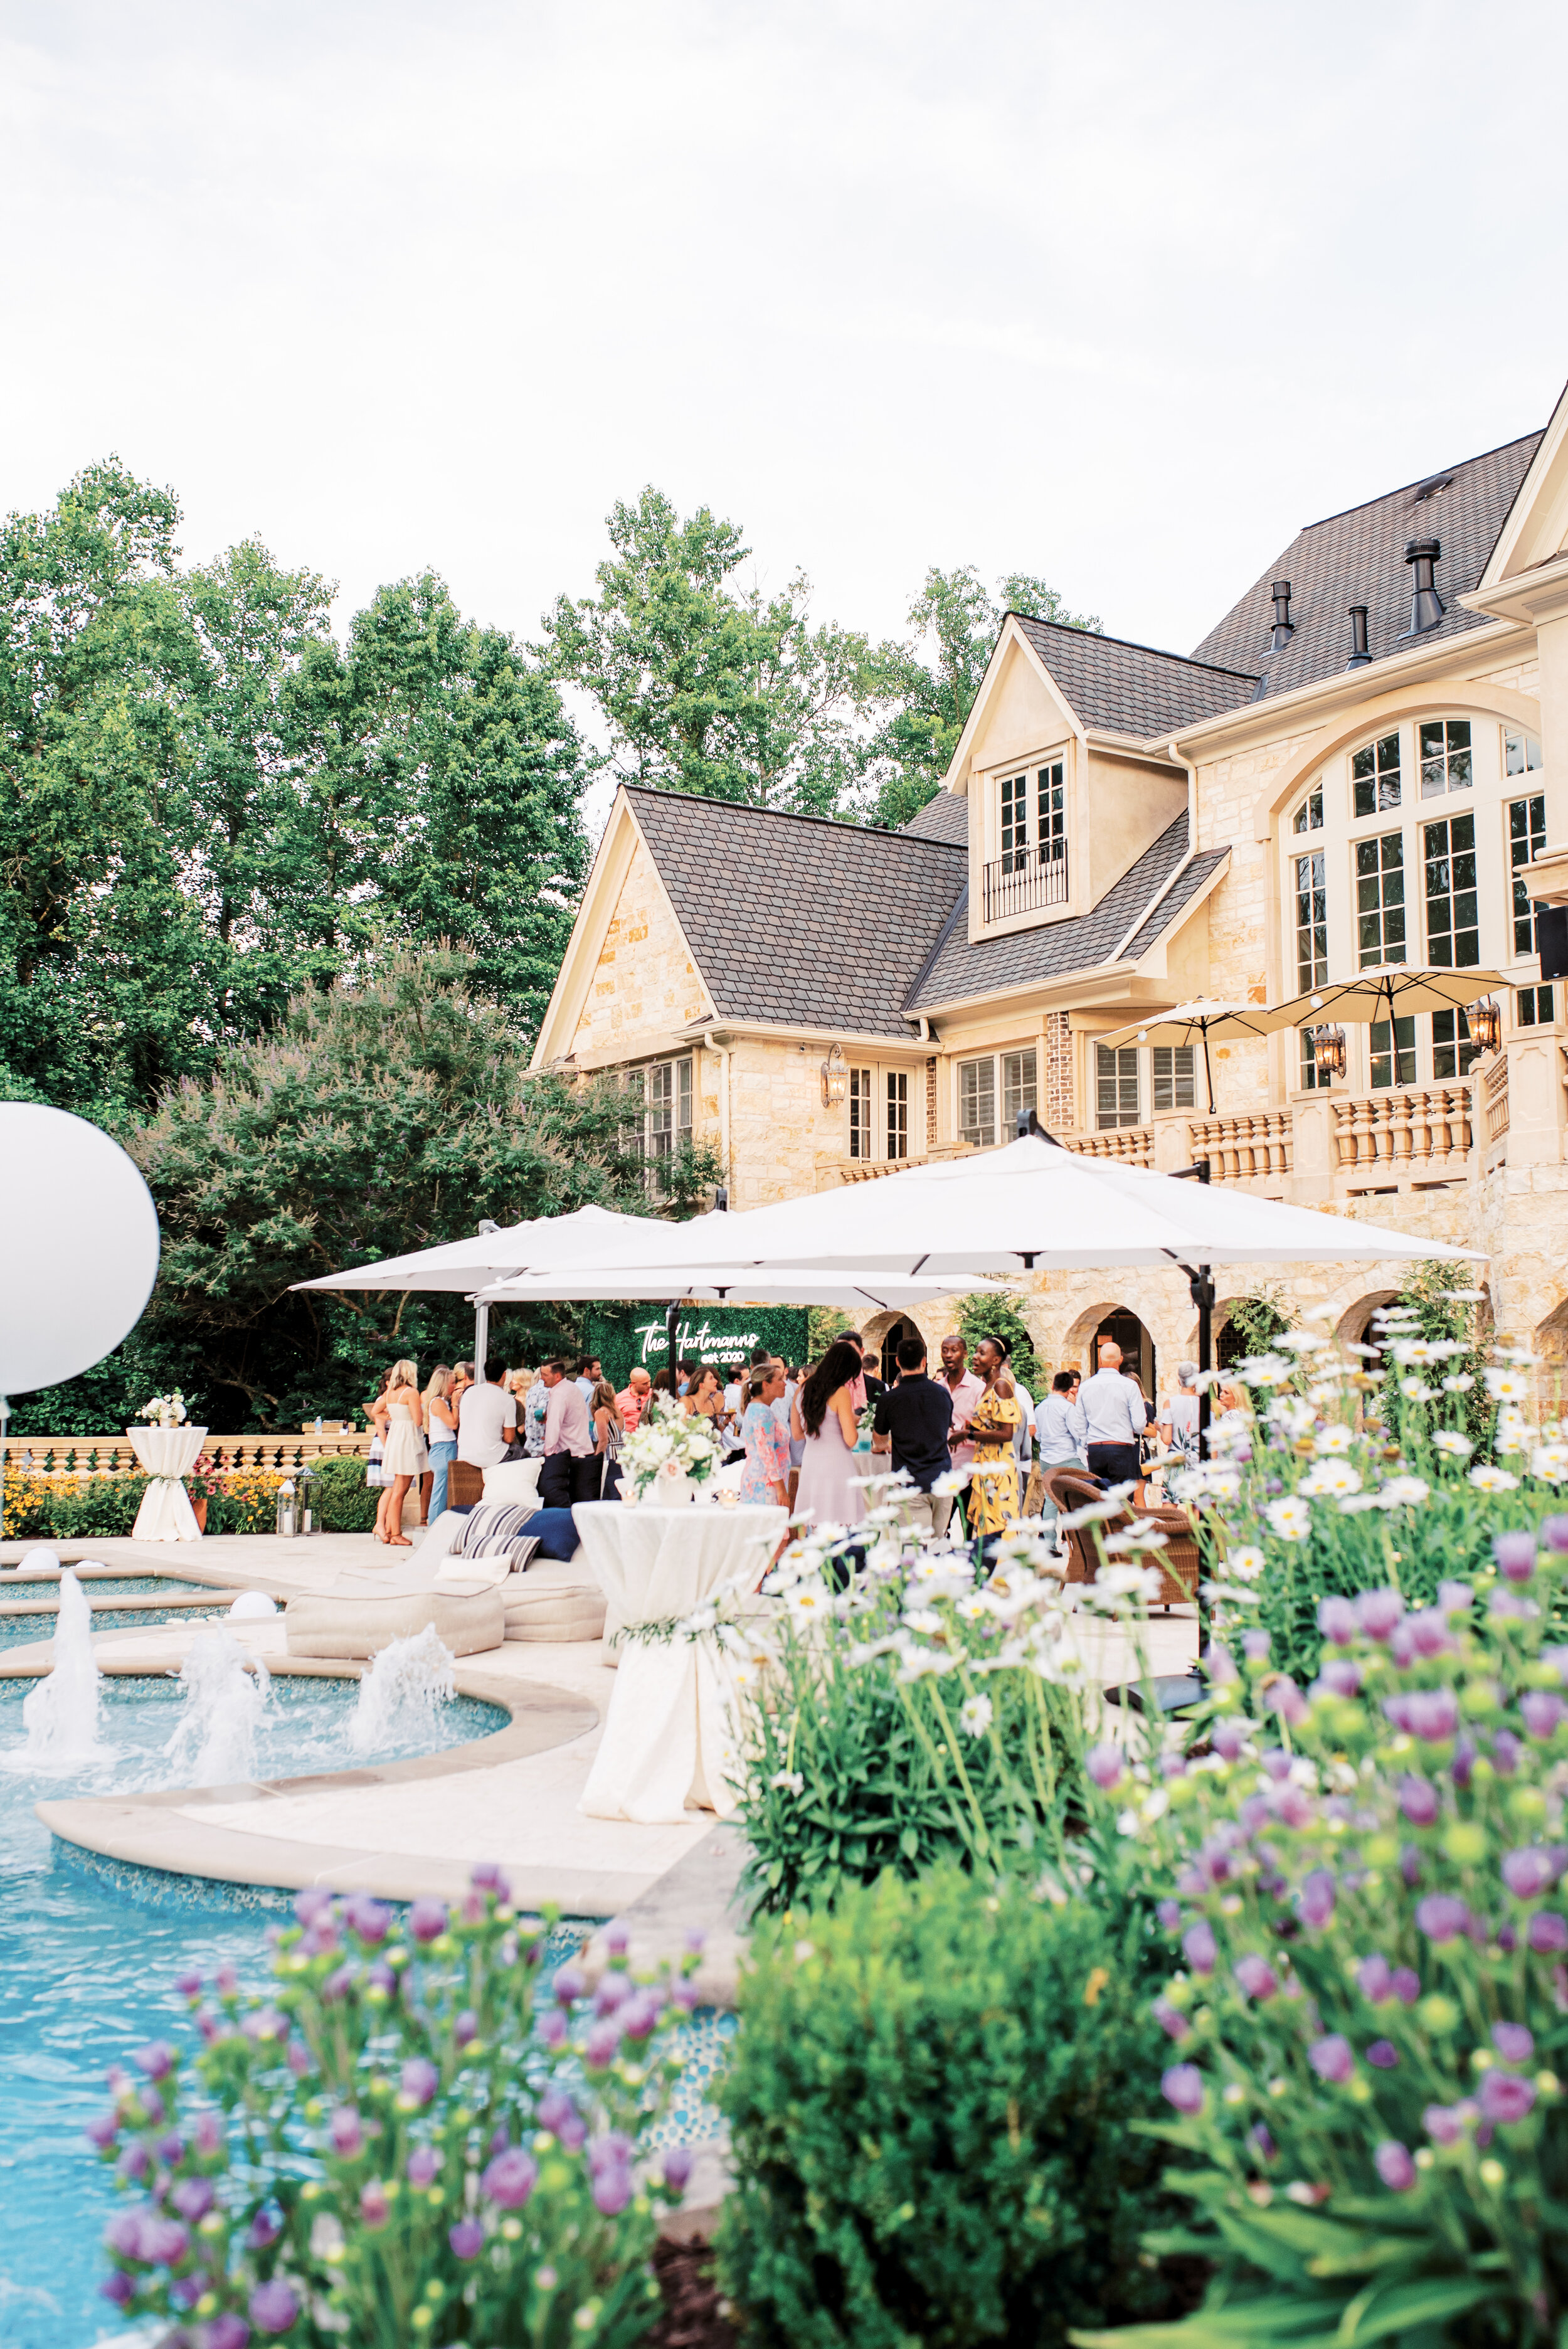 Poolside Engagement Party | Simply Charming Socials | Atlanta Event Planner